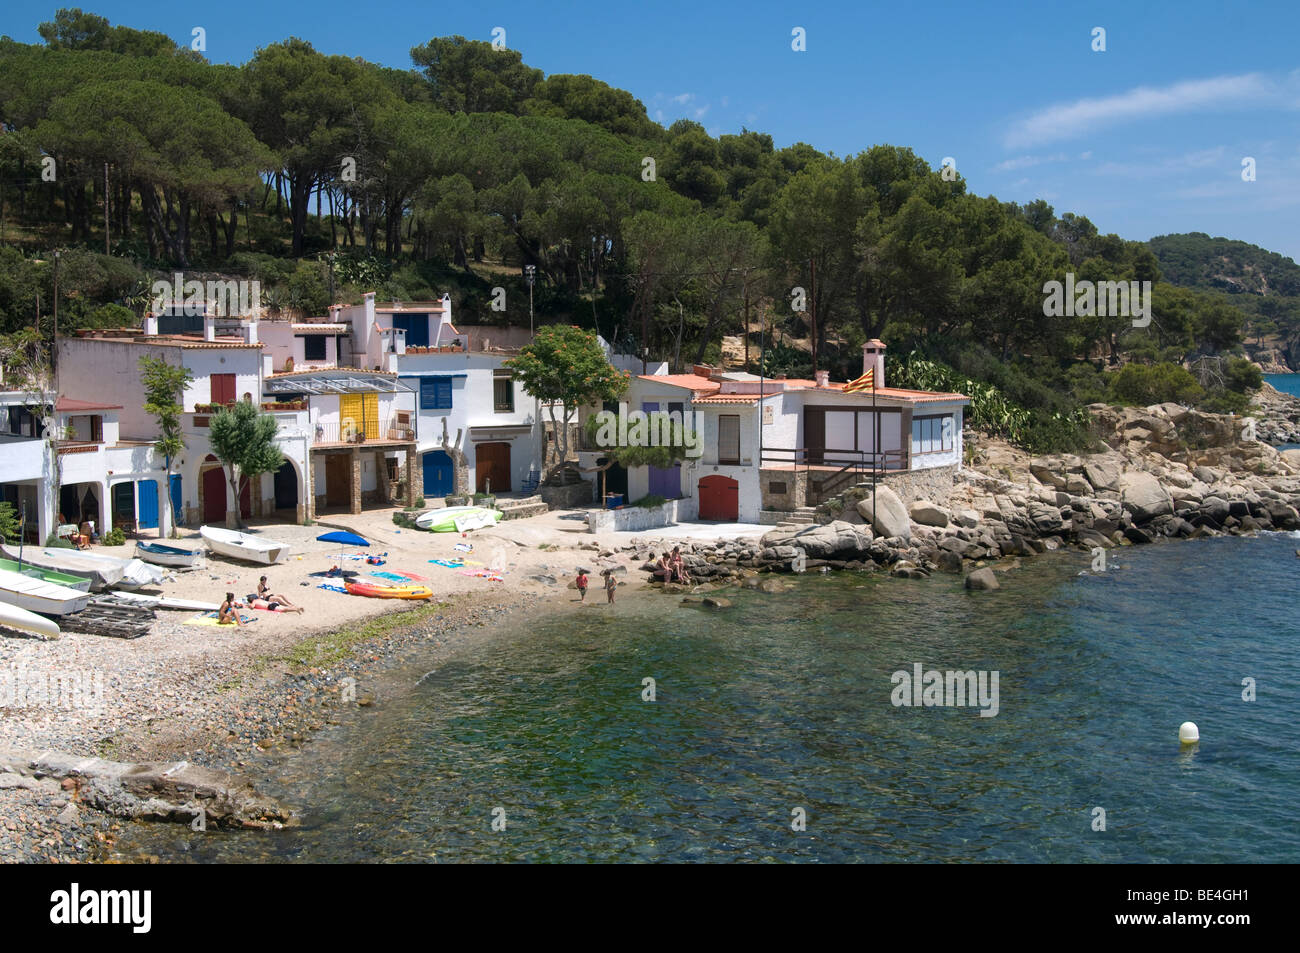 View of a small Mediterranean town in the Spanish coastline, Palamos, Girona, Spain. Stock Photo